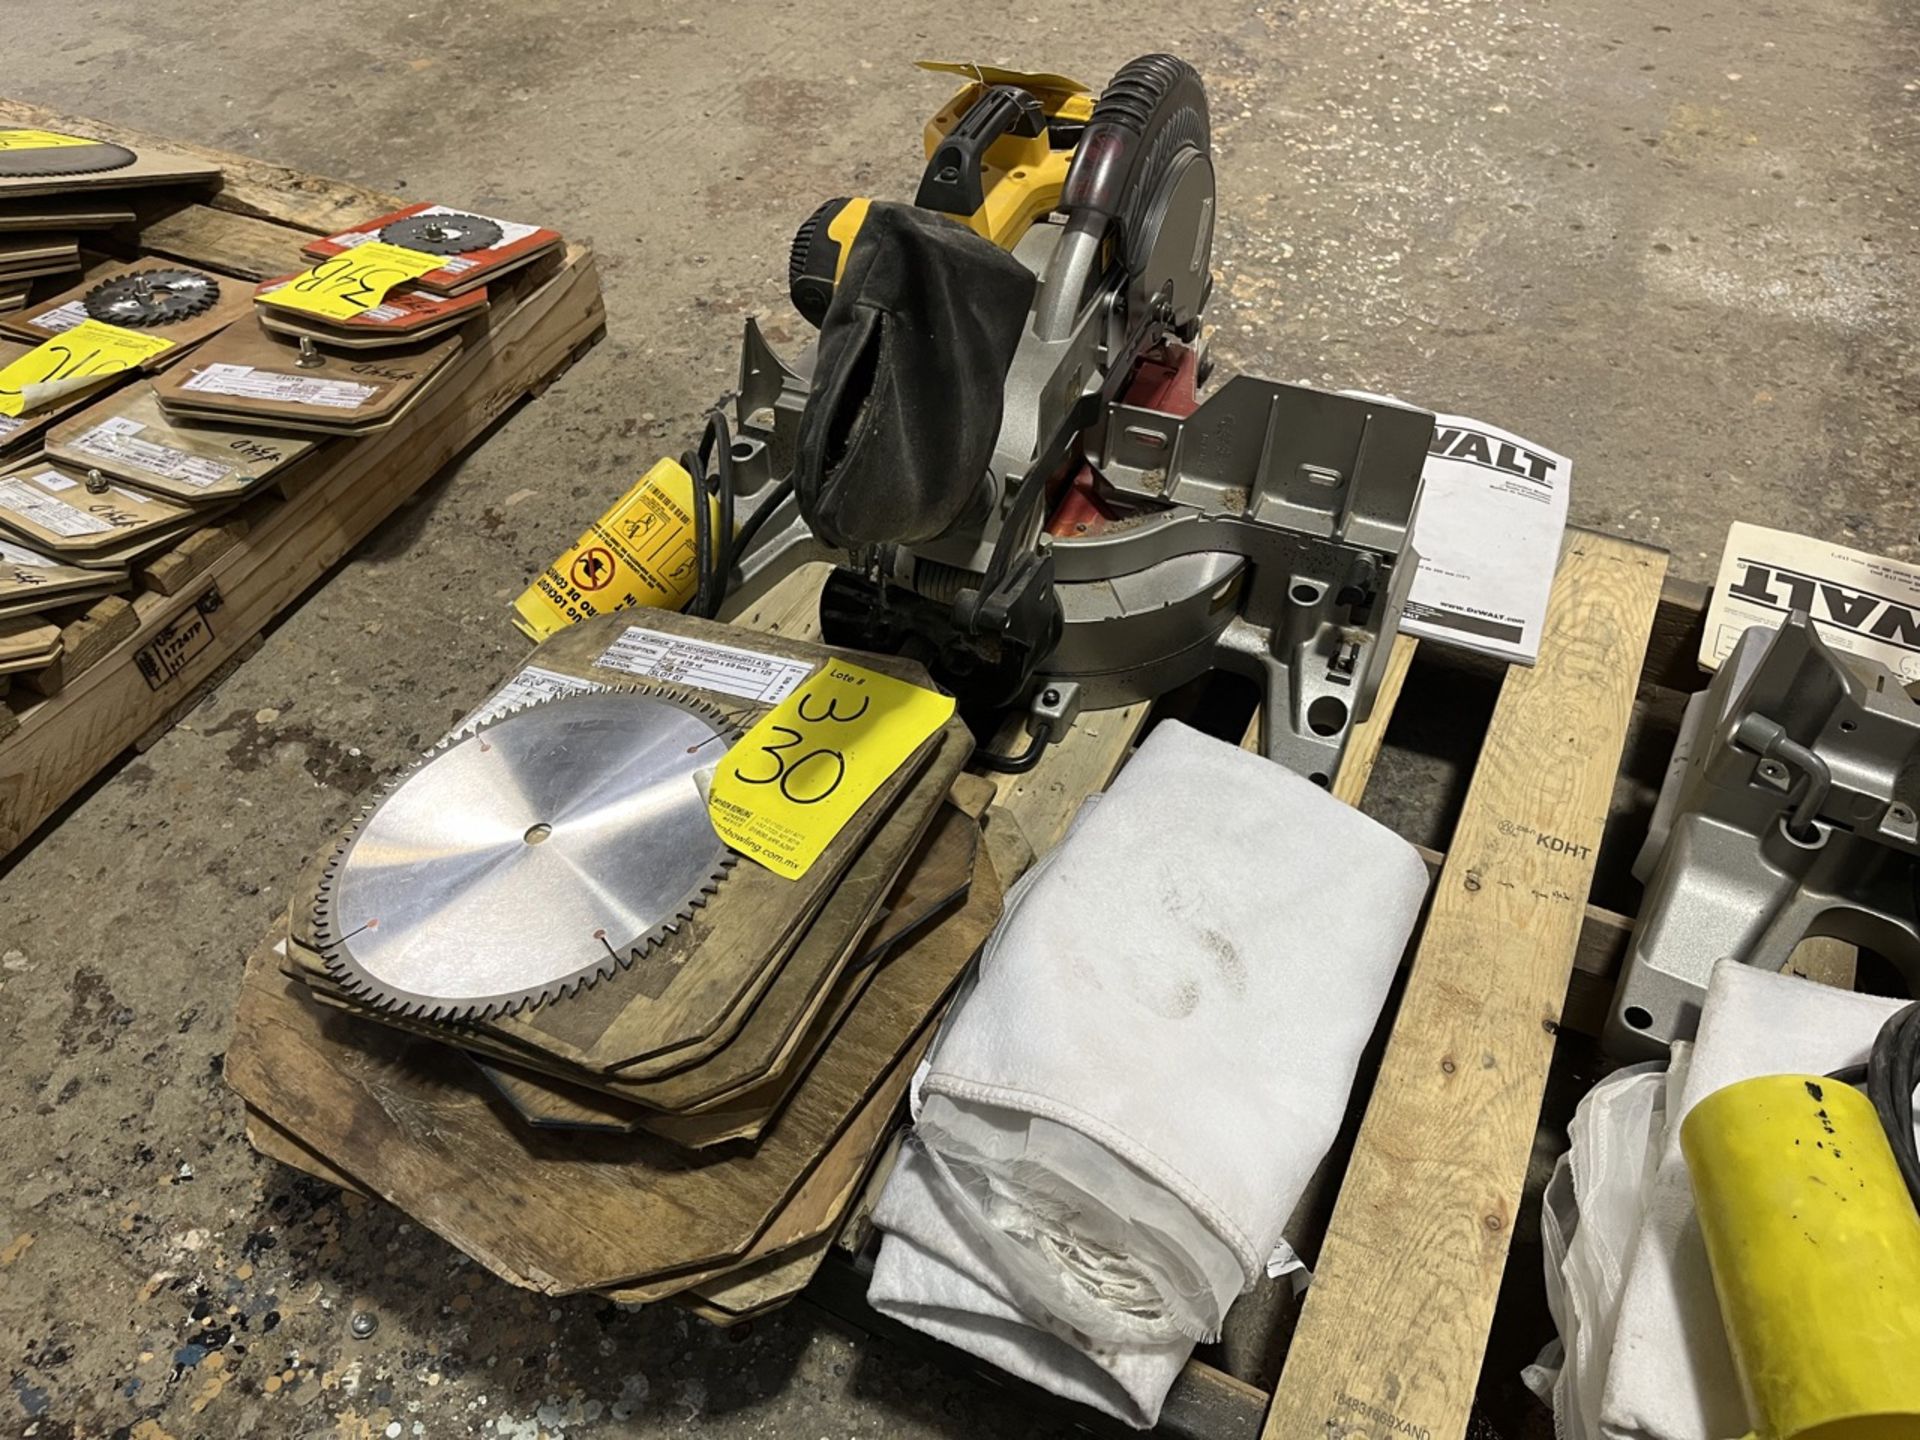 DEWALT 12" Miter Saw, Model DWS780, Serial No. SS, 120V, Includes 5 different sized blades and dust - Image 2 of 10